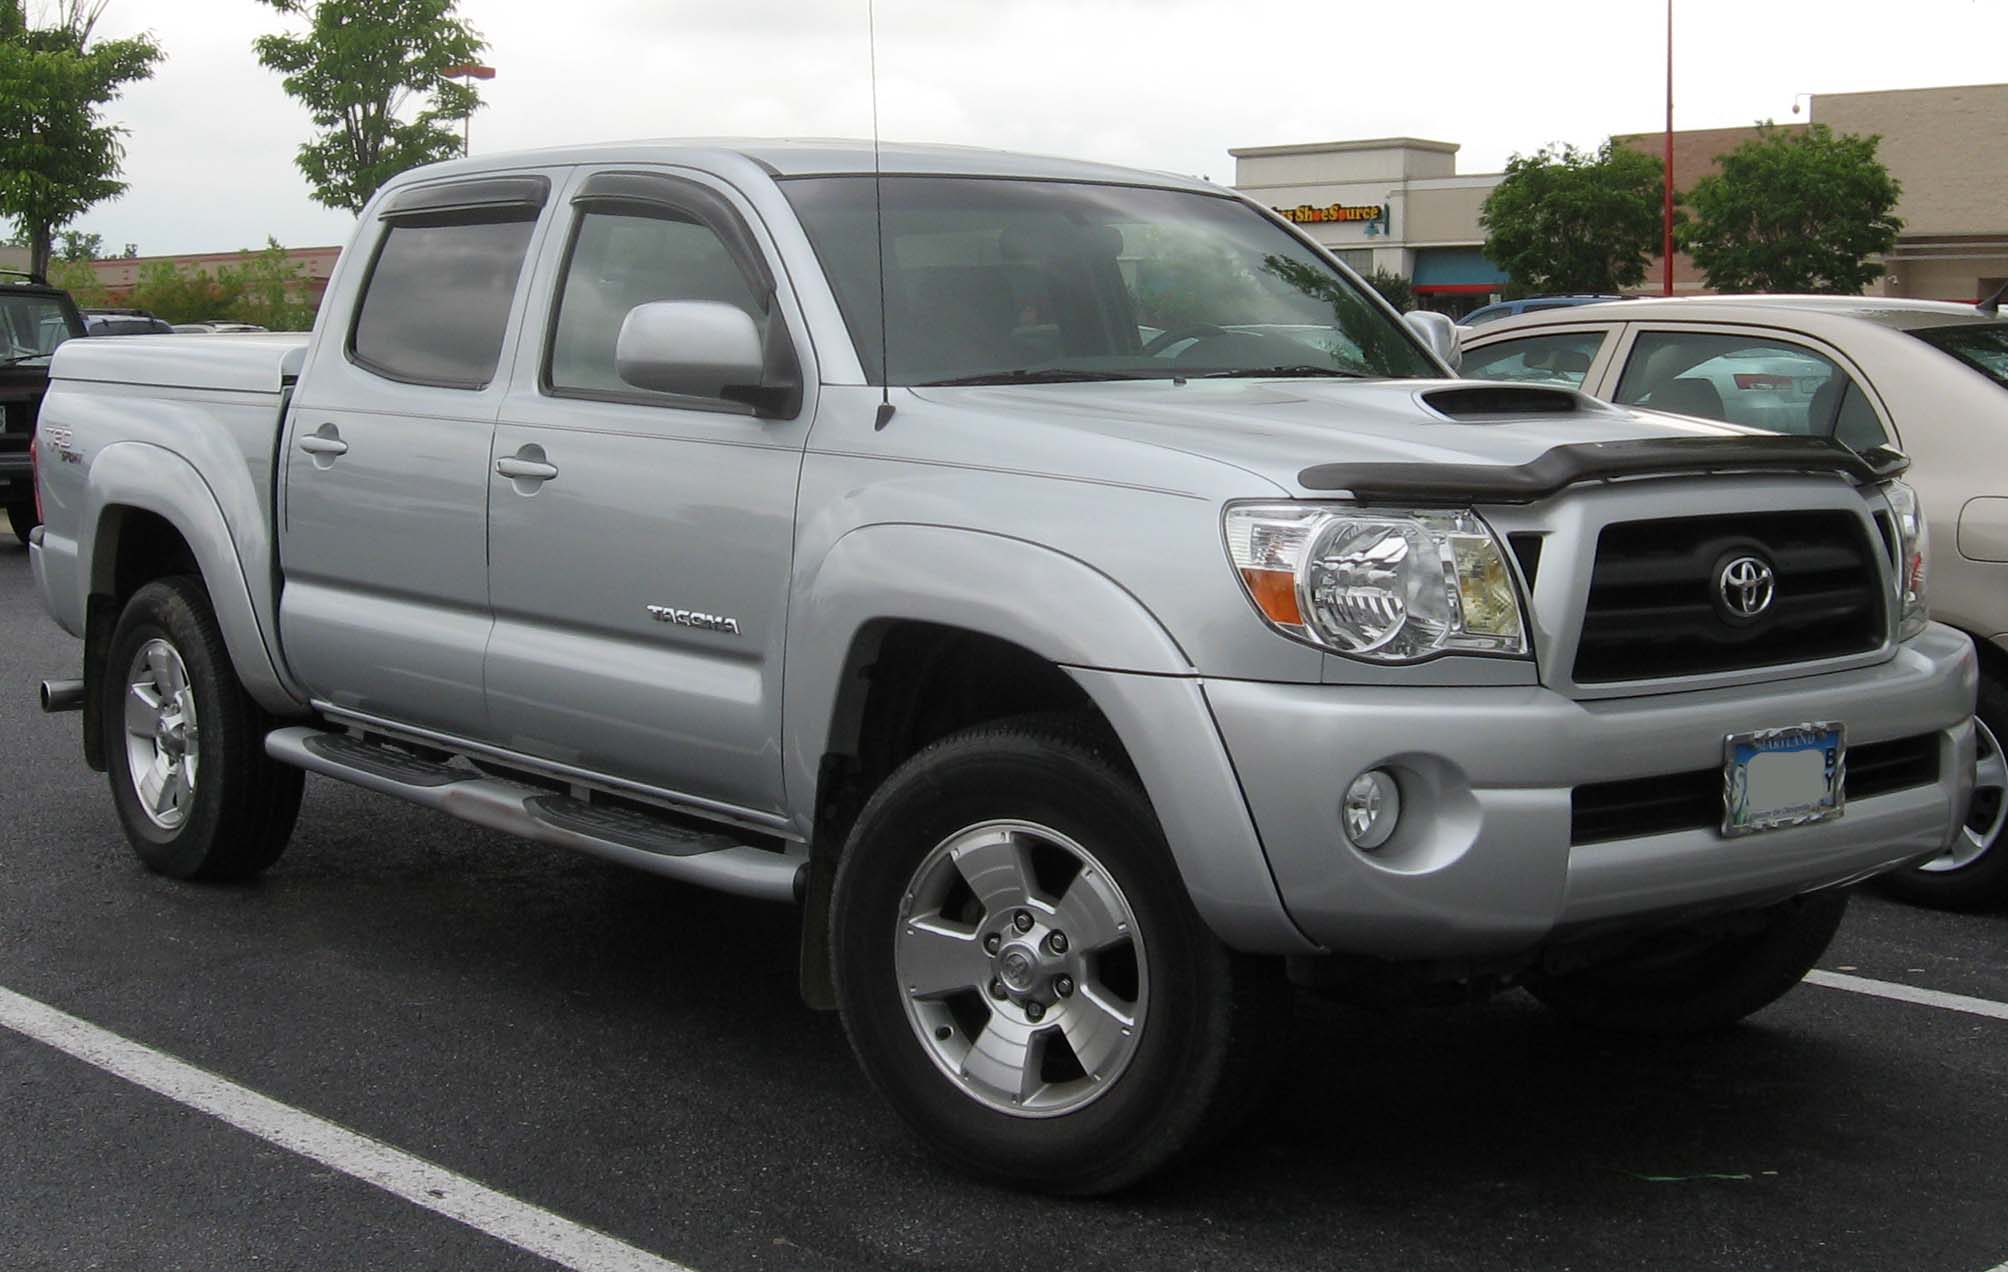 Toyota Tacoma 20937 Hd Wallpapers in Cars   Imagescicom